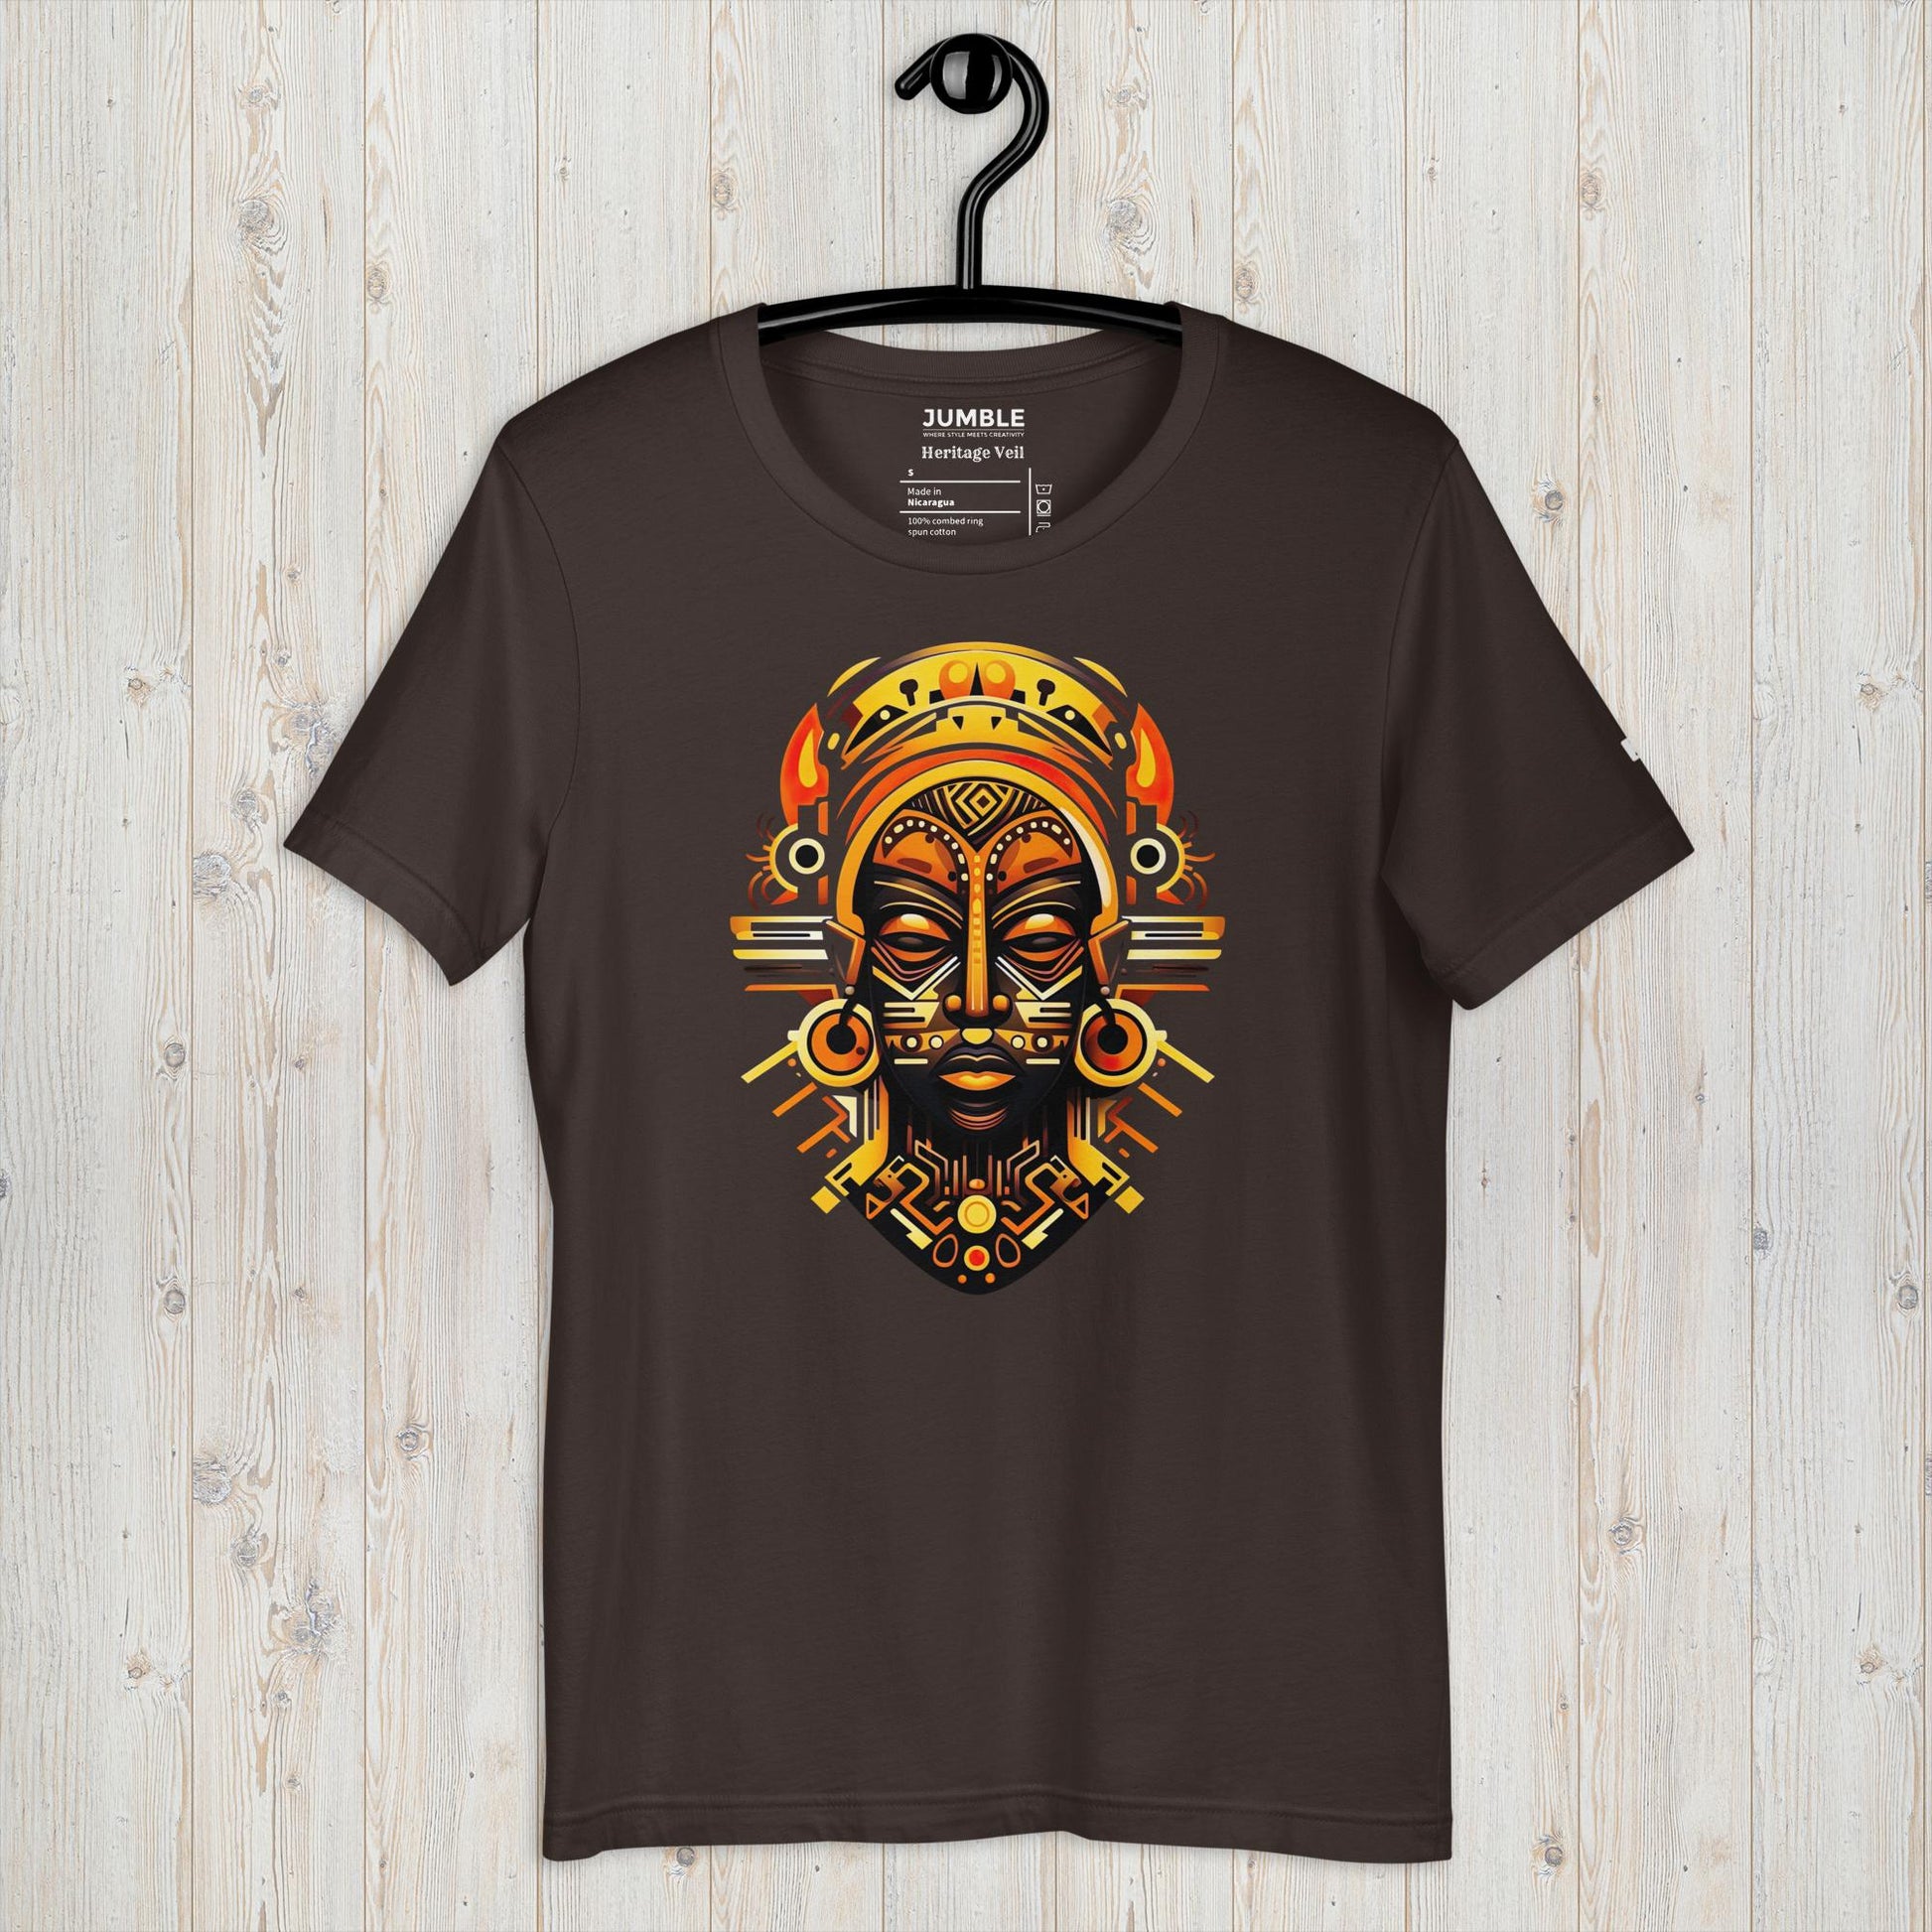 Heritage Veil Unisex t-shirt, in brown. Displayed on a hanger